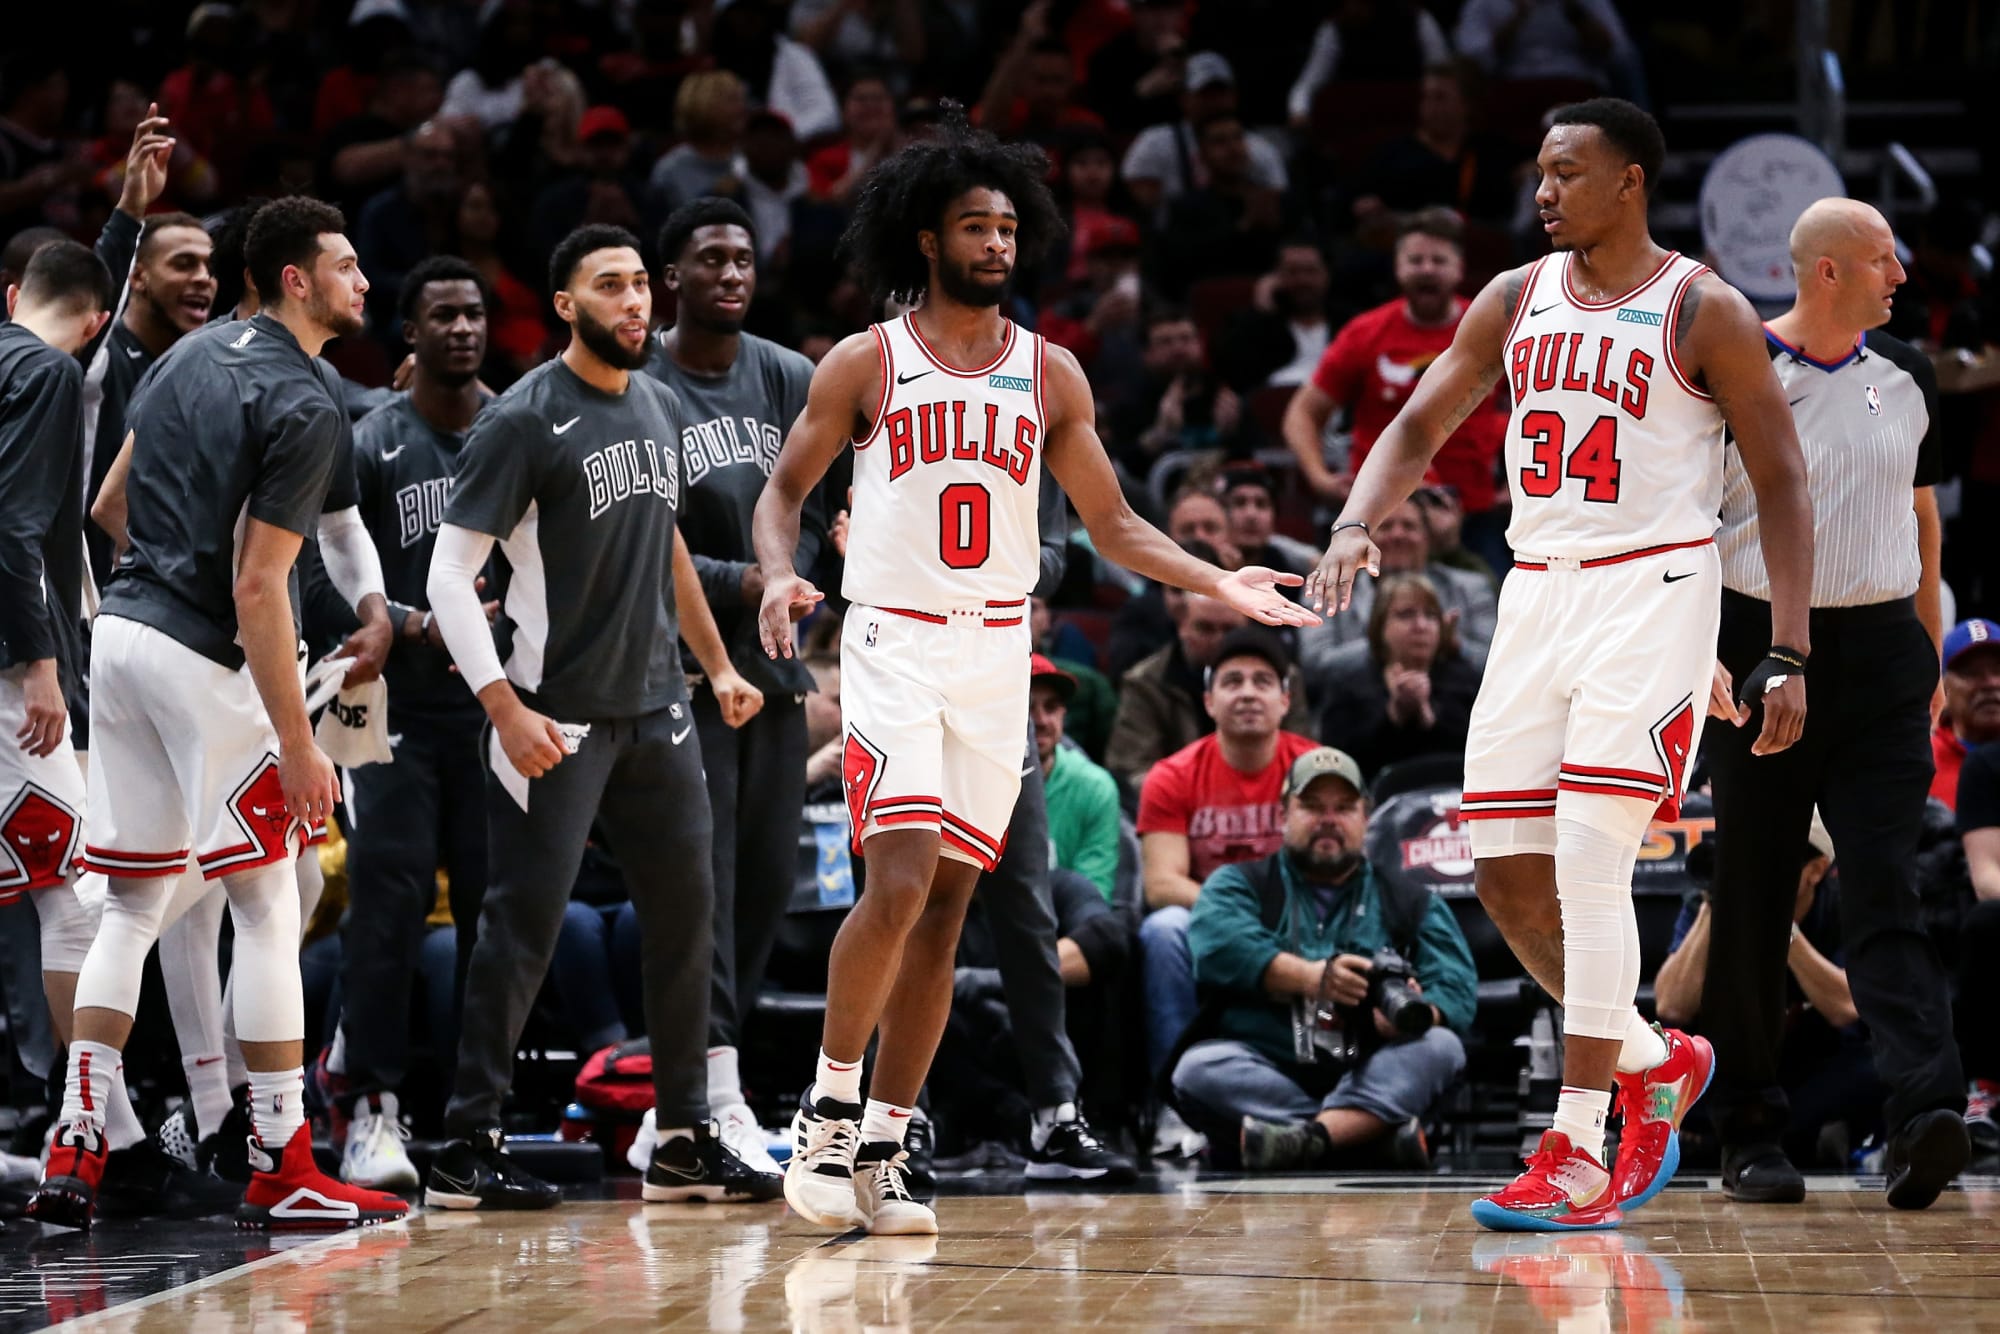 Chicago Bulls Who's the secondbest player on the roster?